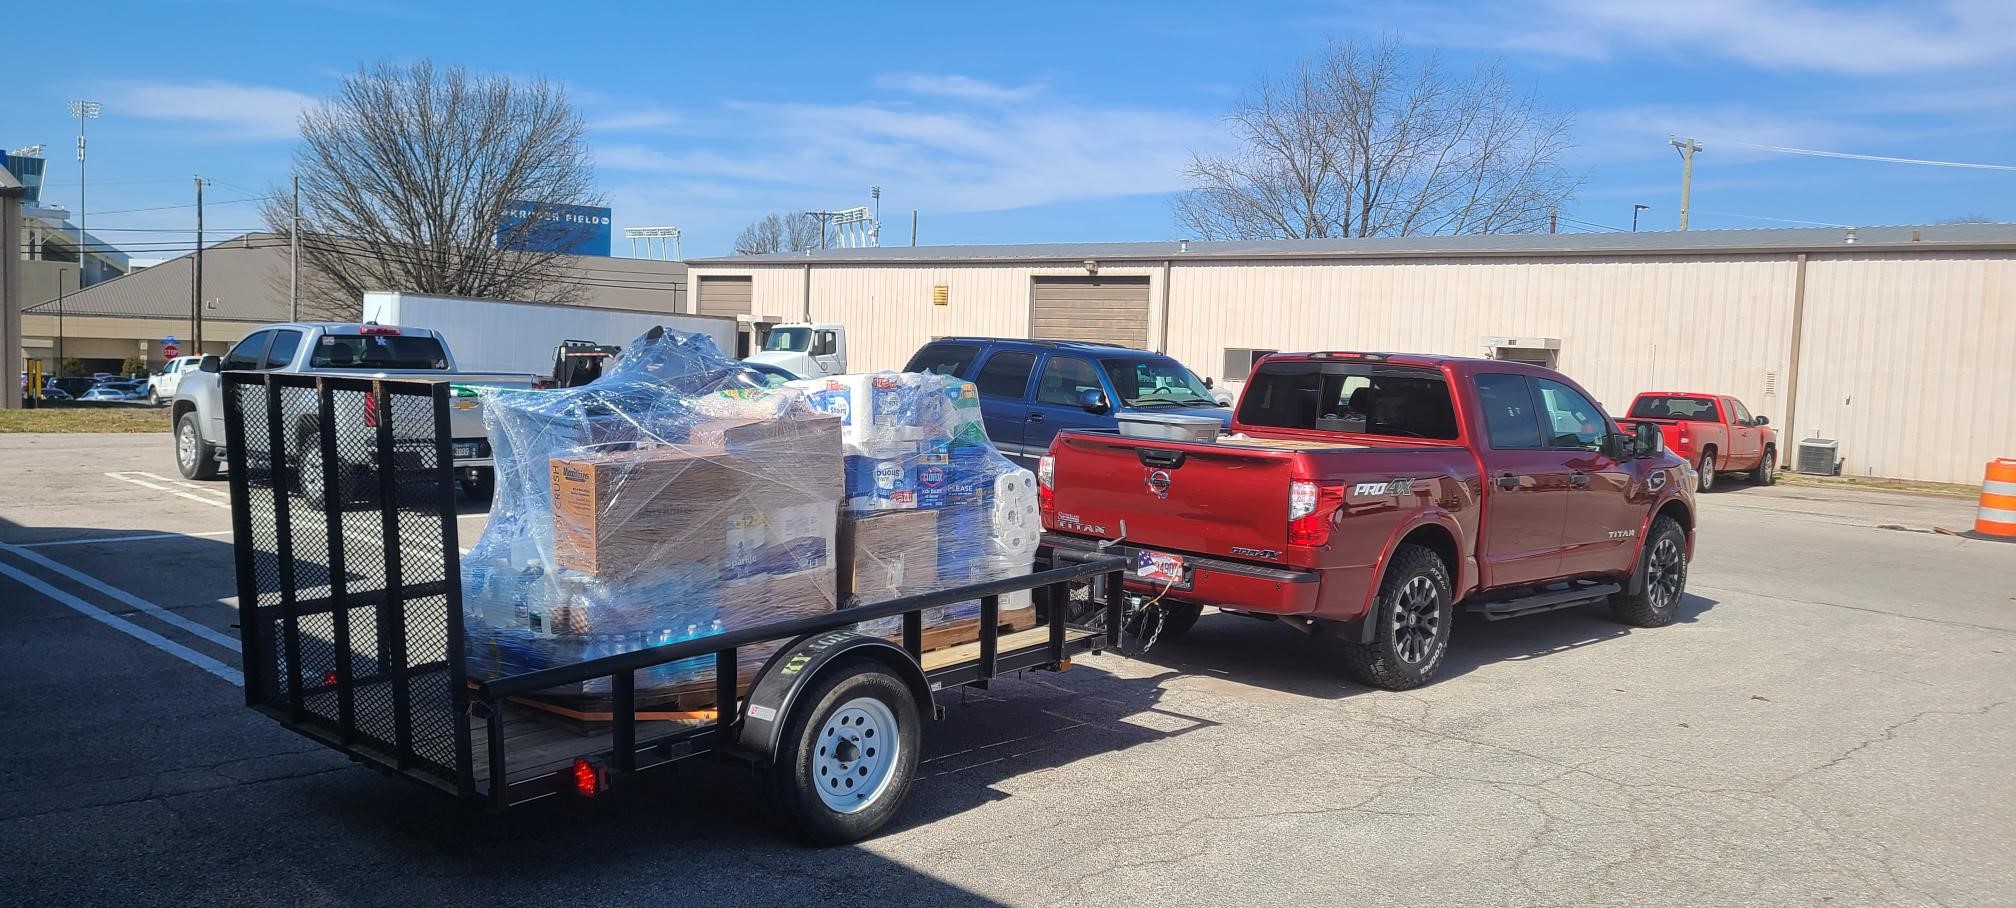 A truck full of donated supplies for Eastern Kentucky flood victims leaves UK's Agriculture Distribution Center for the Wolfe County Extension office on March 5. Photo by Chris Foxworth, UK agricultural communications.